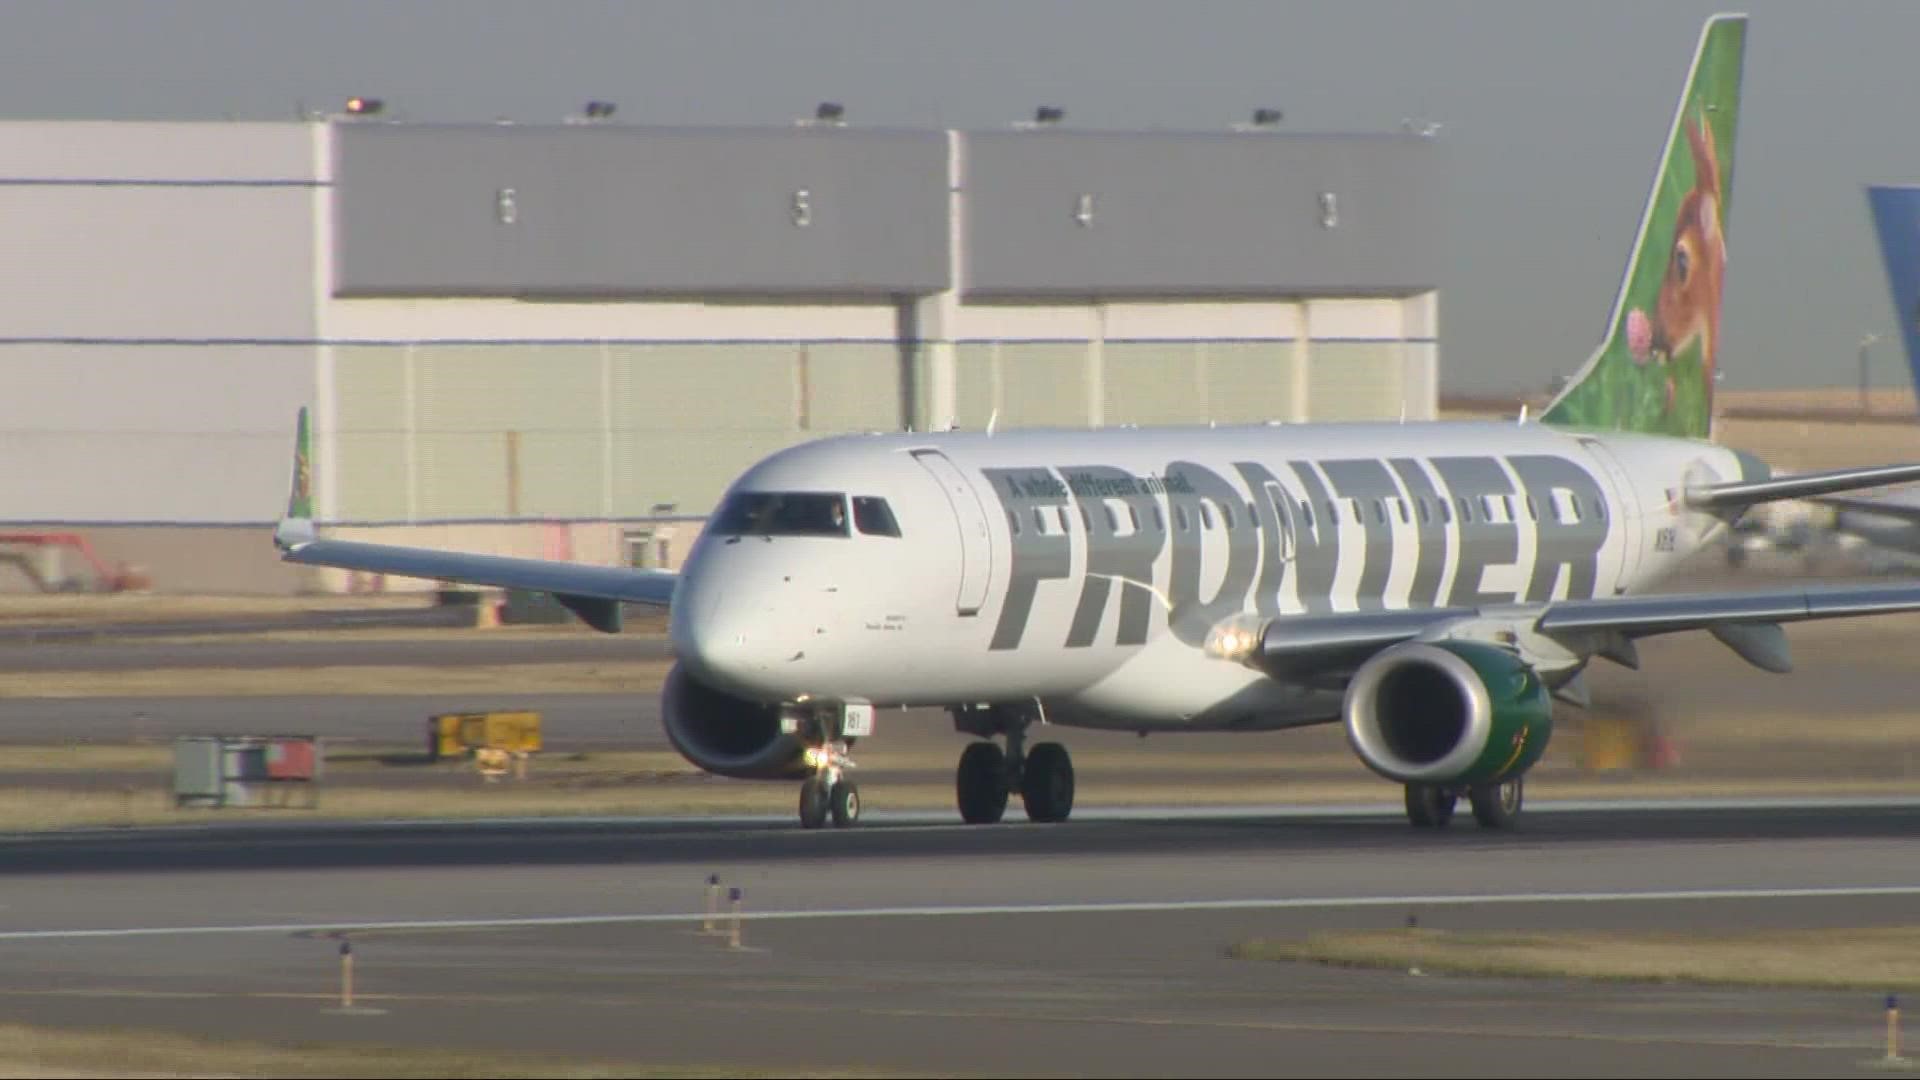 Frontier Airlines is cutting their customer service lines for flyers, meaning that you won't be able to call to speak with a human being anymore.